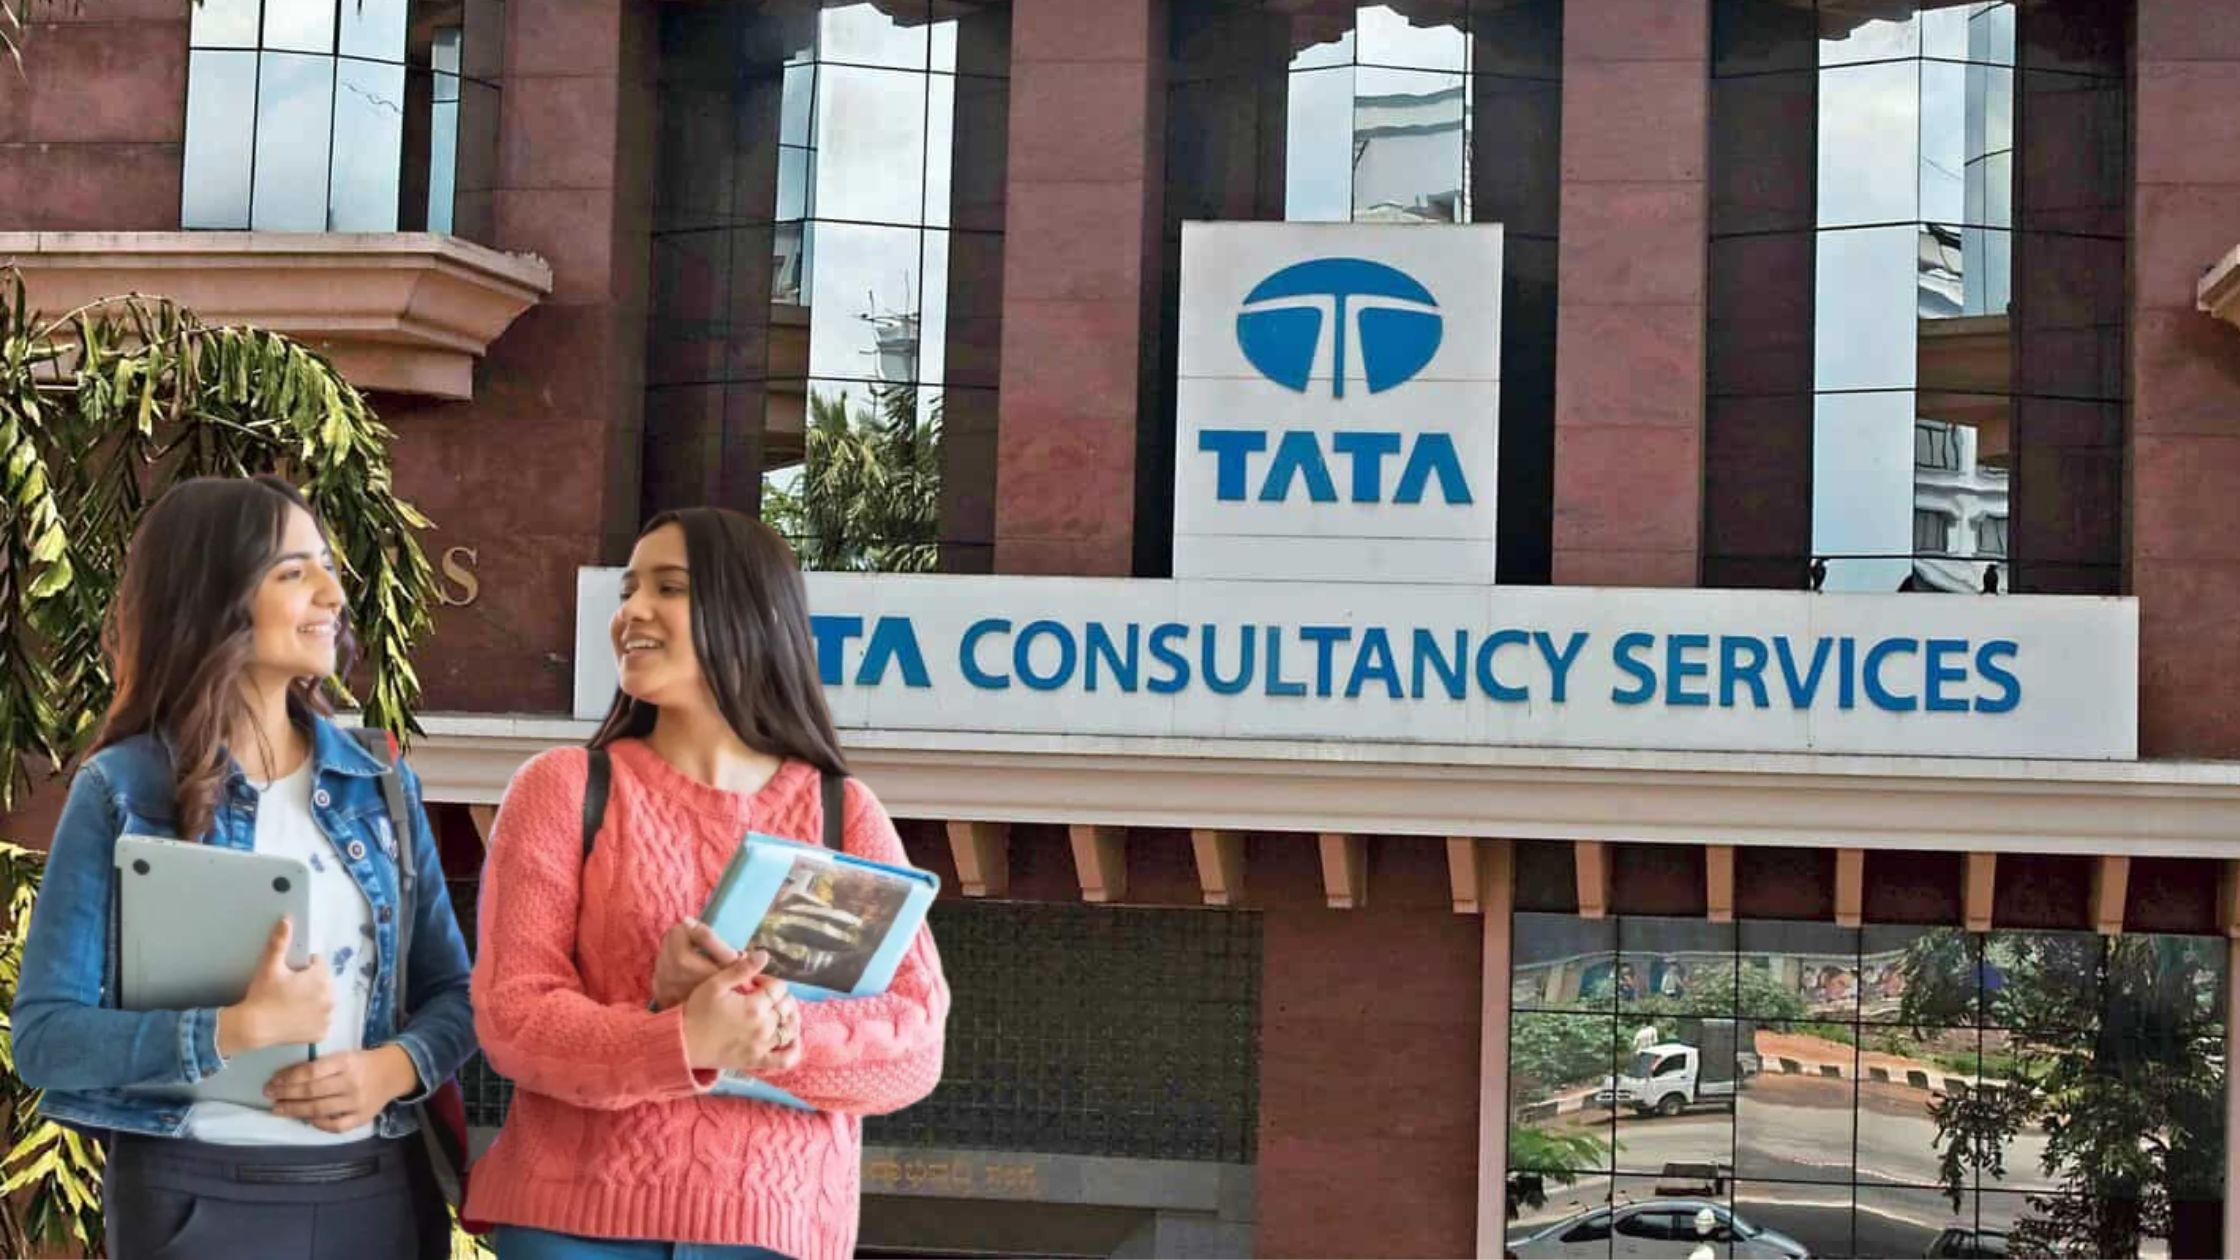 Tata Consultancy Services Will Provide Free Employment Training